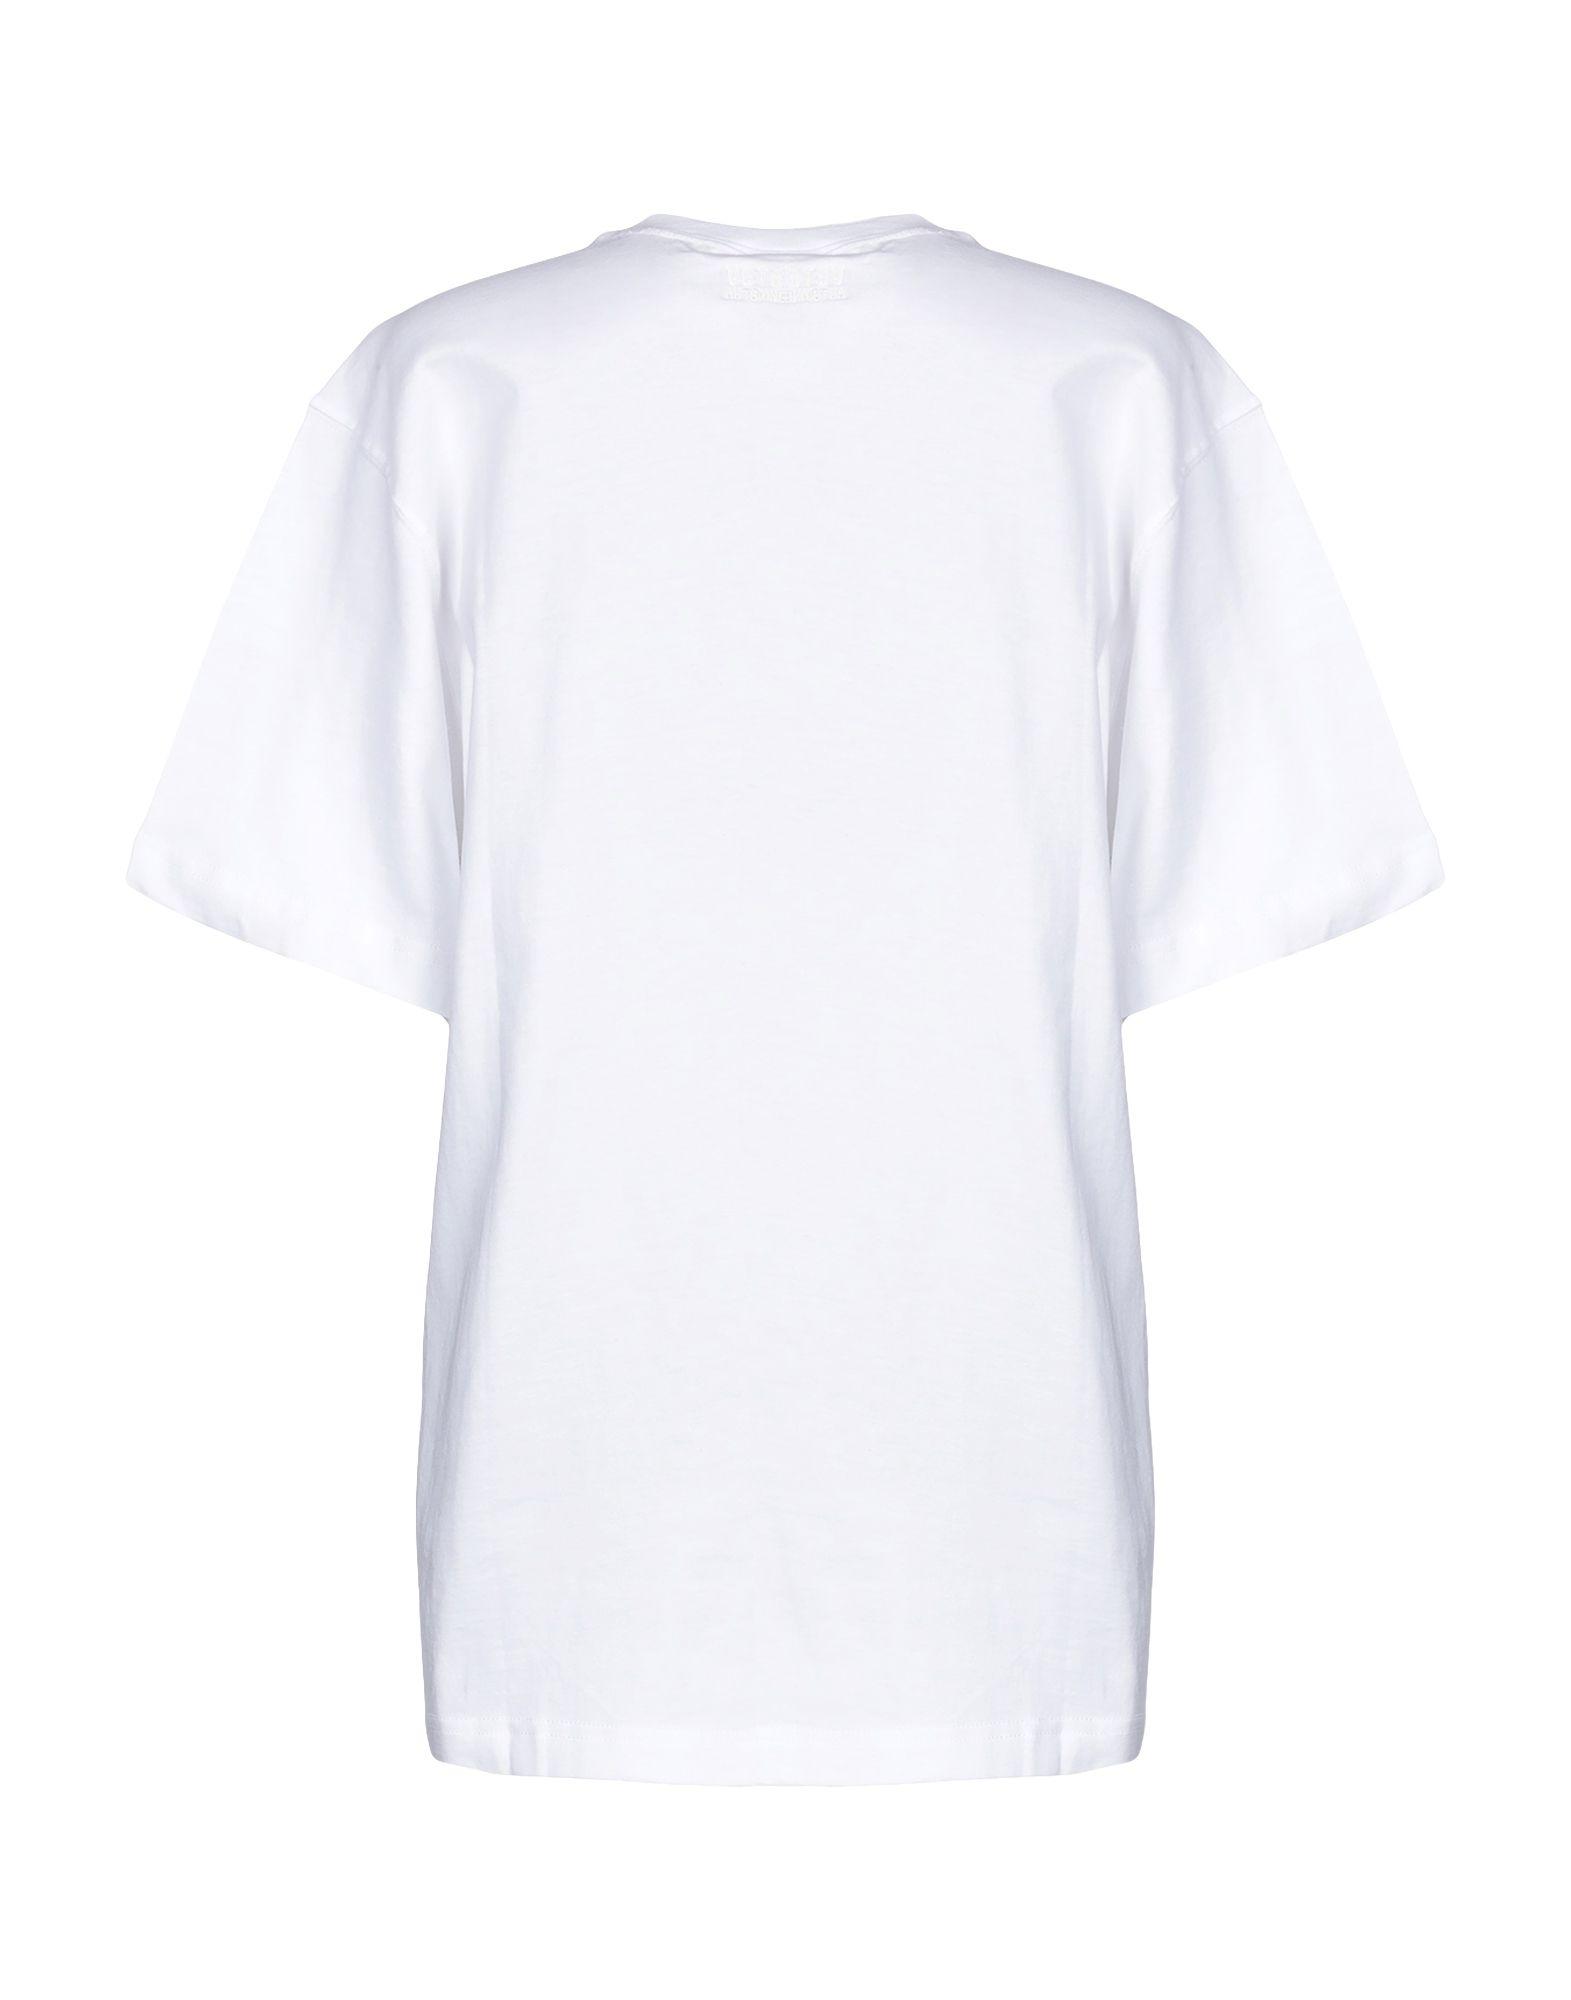 Vetements Cotton T-shirt in White - Lyst